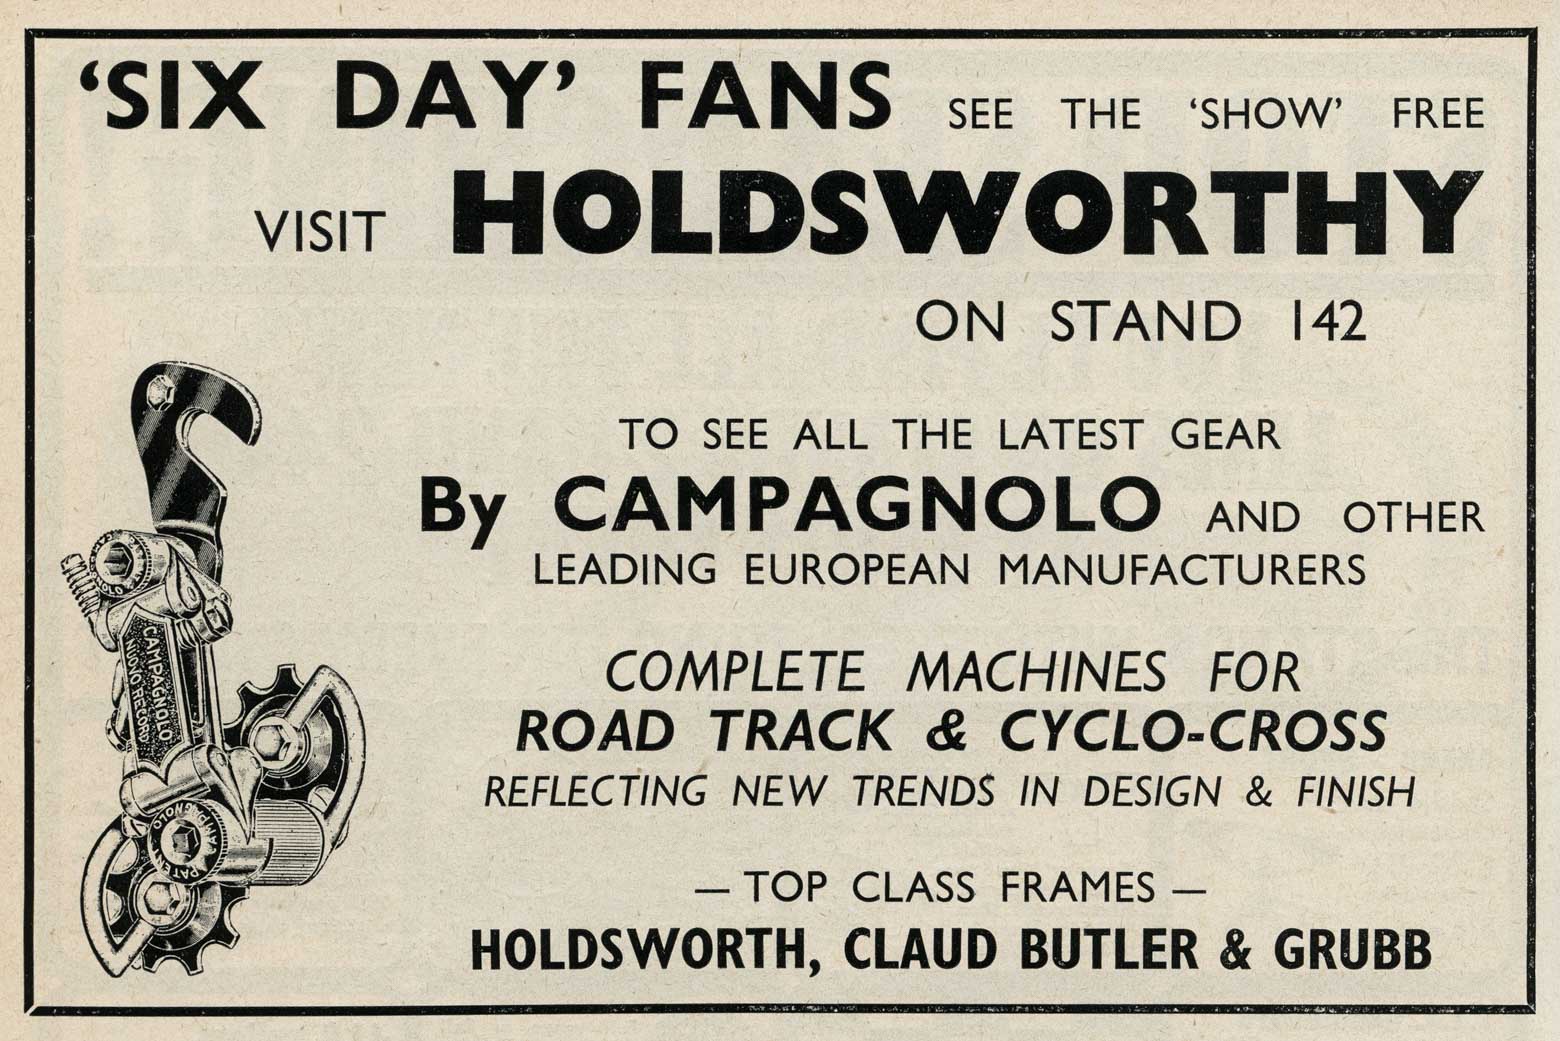 Sporting Cyclist October 1967 Holdsworth advert main image